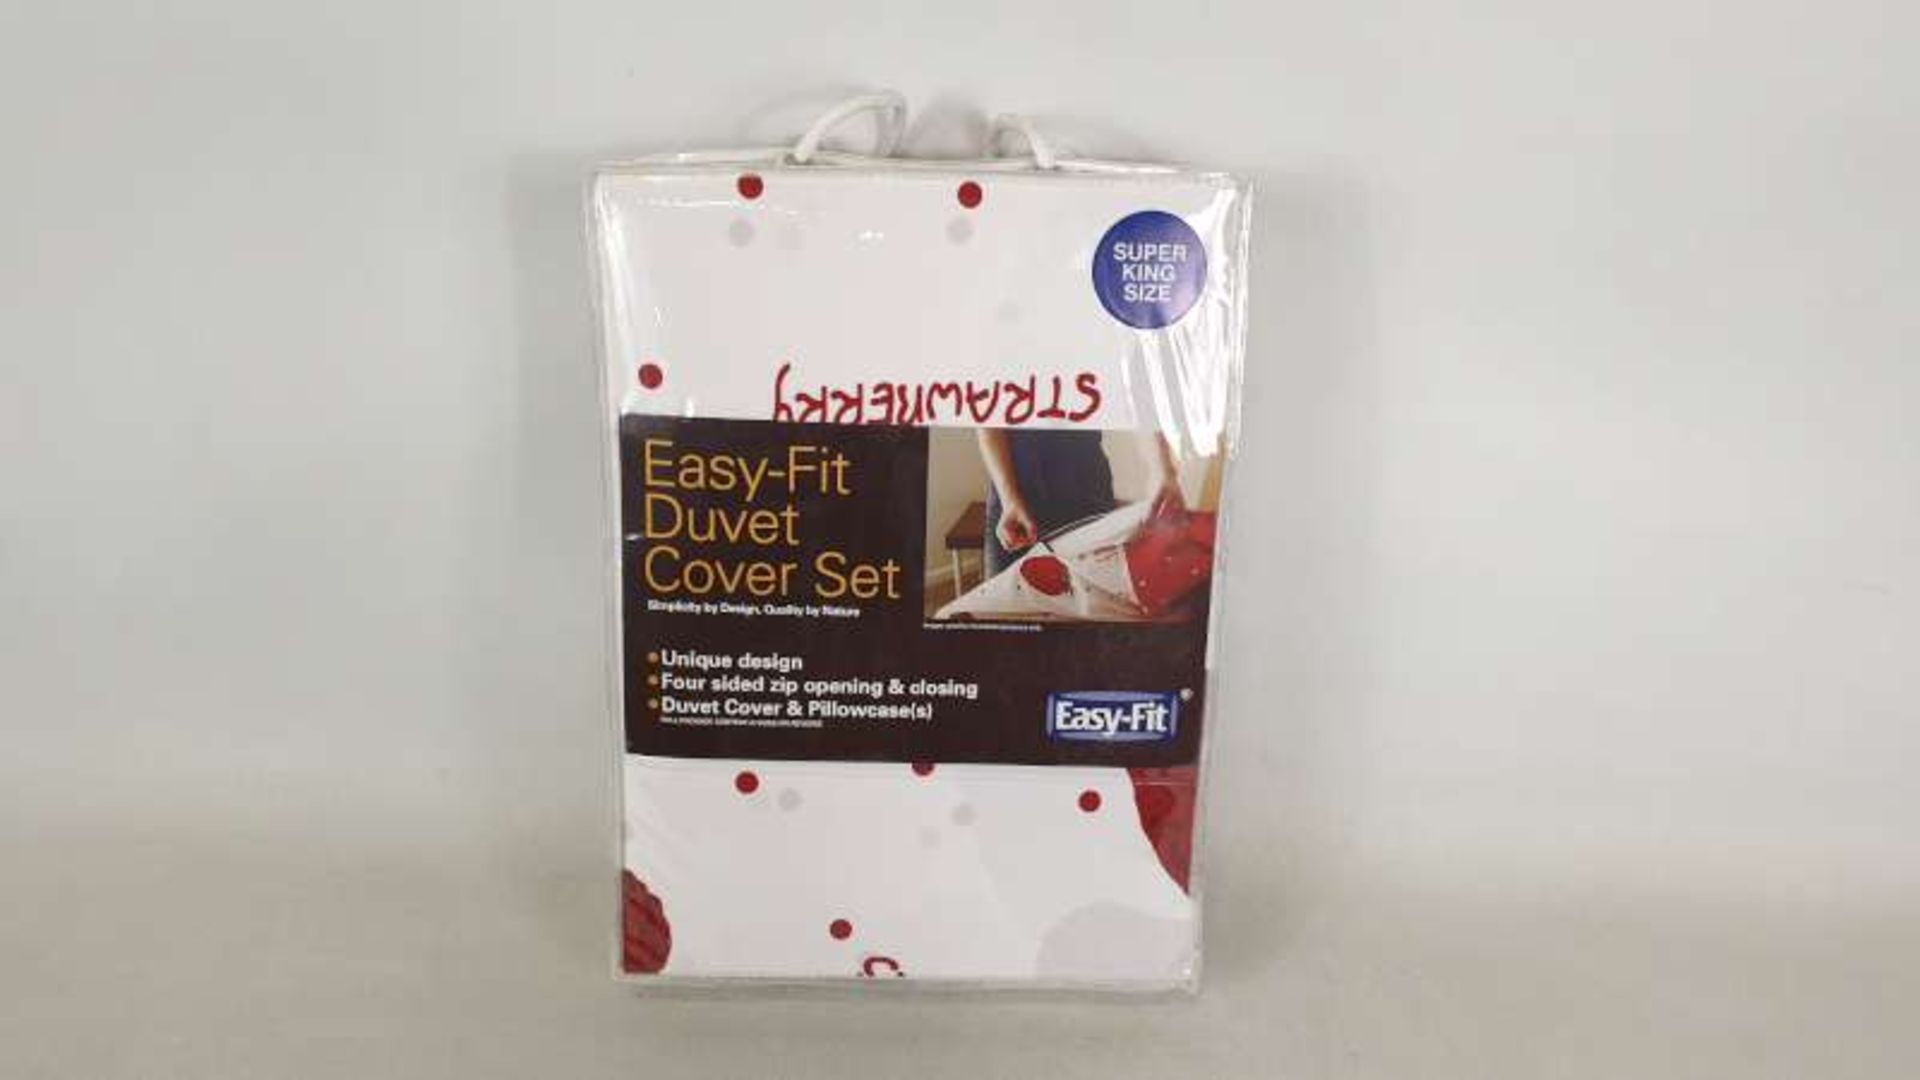 6 X BRAND NEW SUPER KING SIZE DUVET COVER SETS WITH STRAWBERRY DETAIL